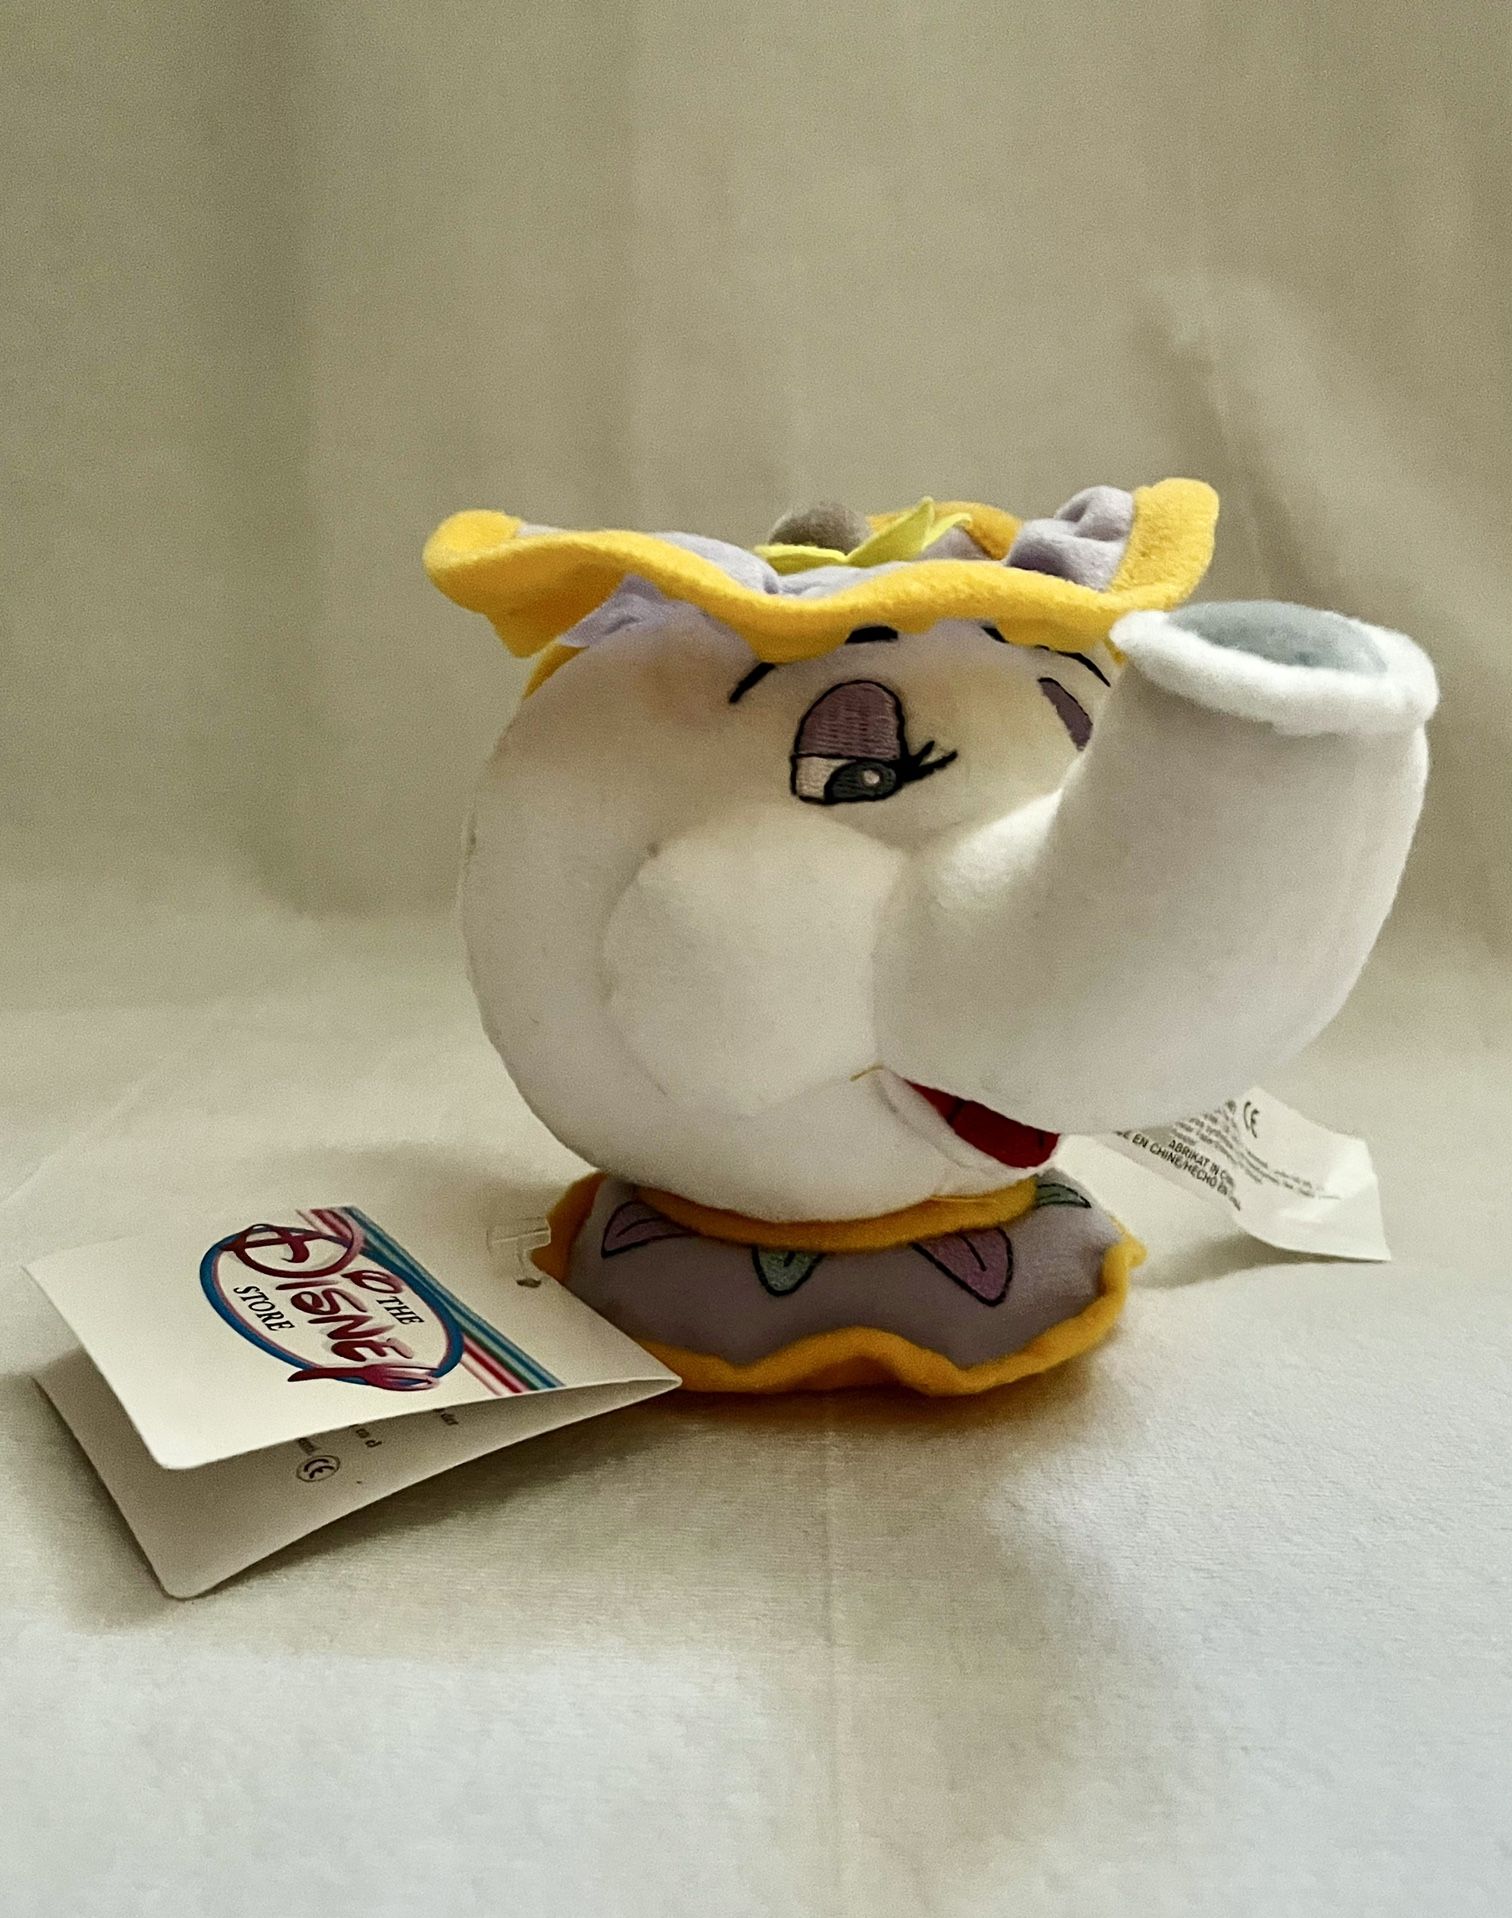 Vintage Disney Beauty and The Beast Mrs. Potts Plush Toy Like-New with Tags